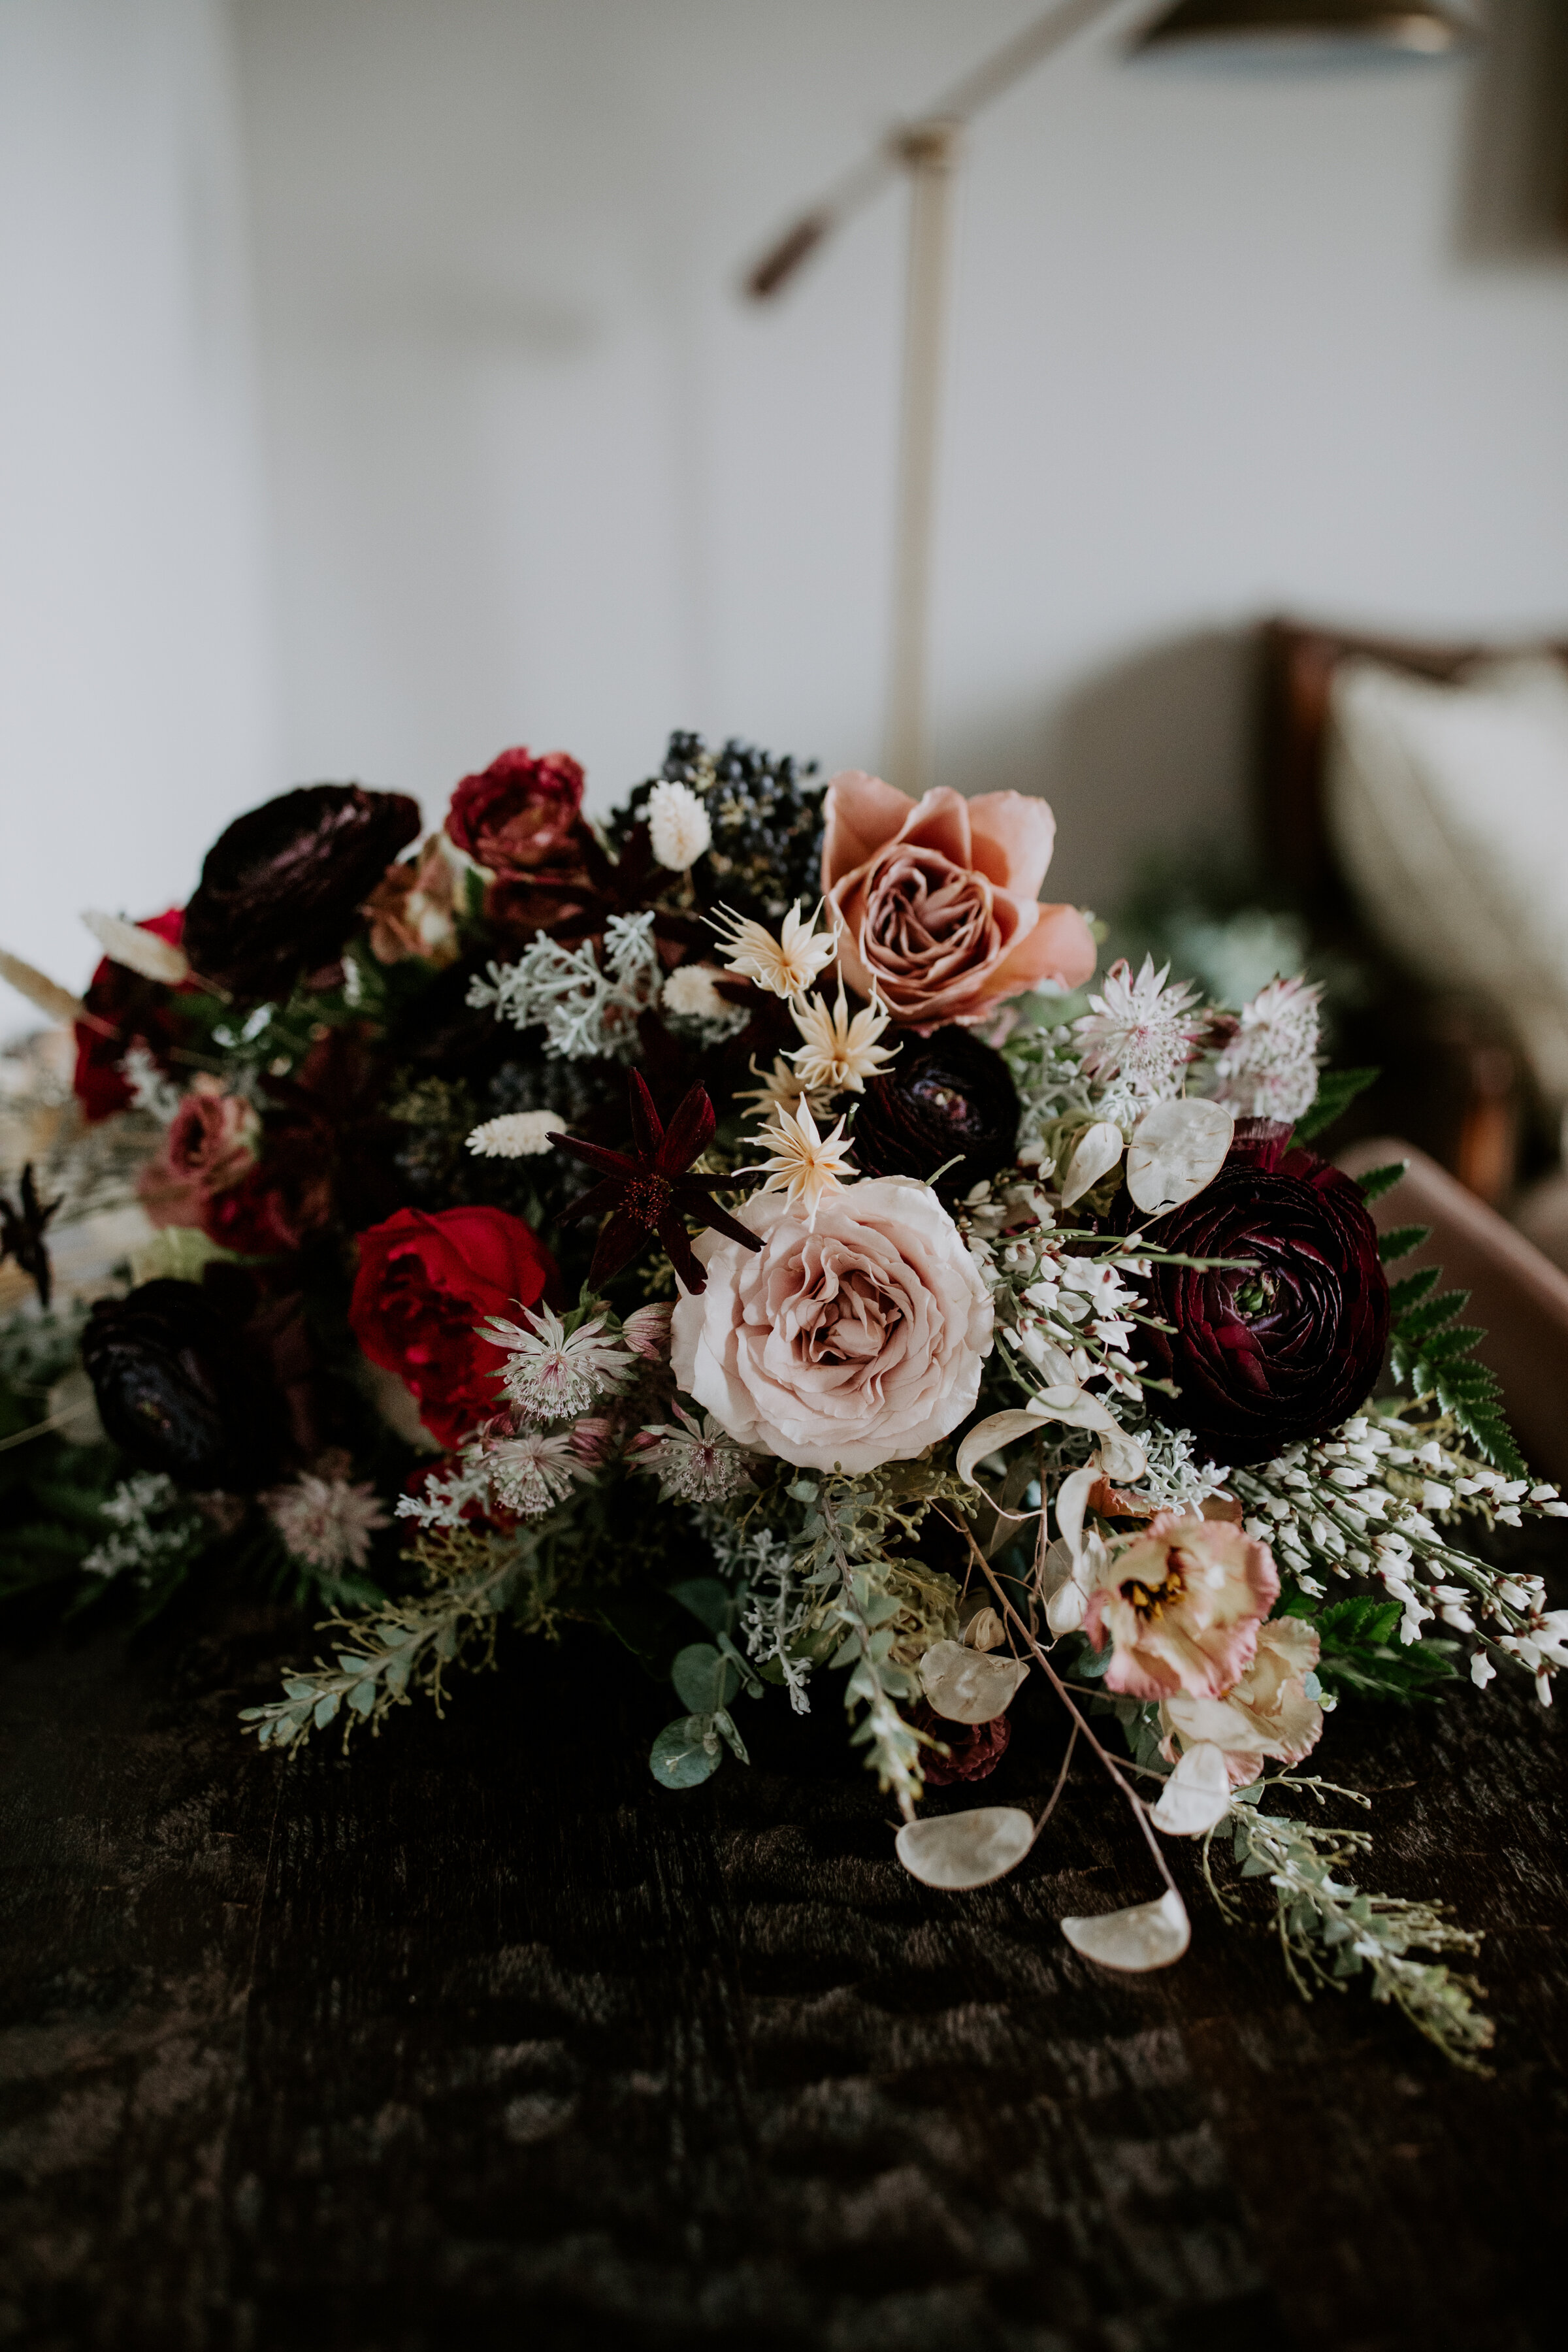 Loose, whimsical winter bridal bouquet with eggplant, blush, mauve, and burgundy garden roses and ranunculus, dried flowers, and natural, untamed greenery. Nashville wedding floral design at the Cordelle.